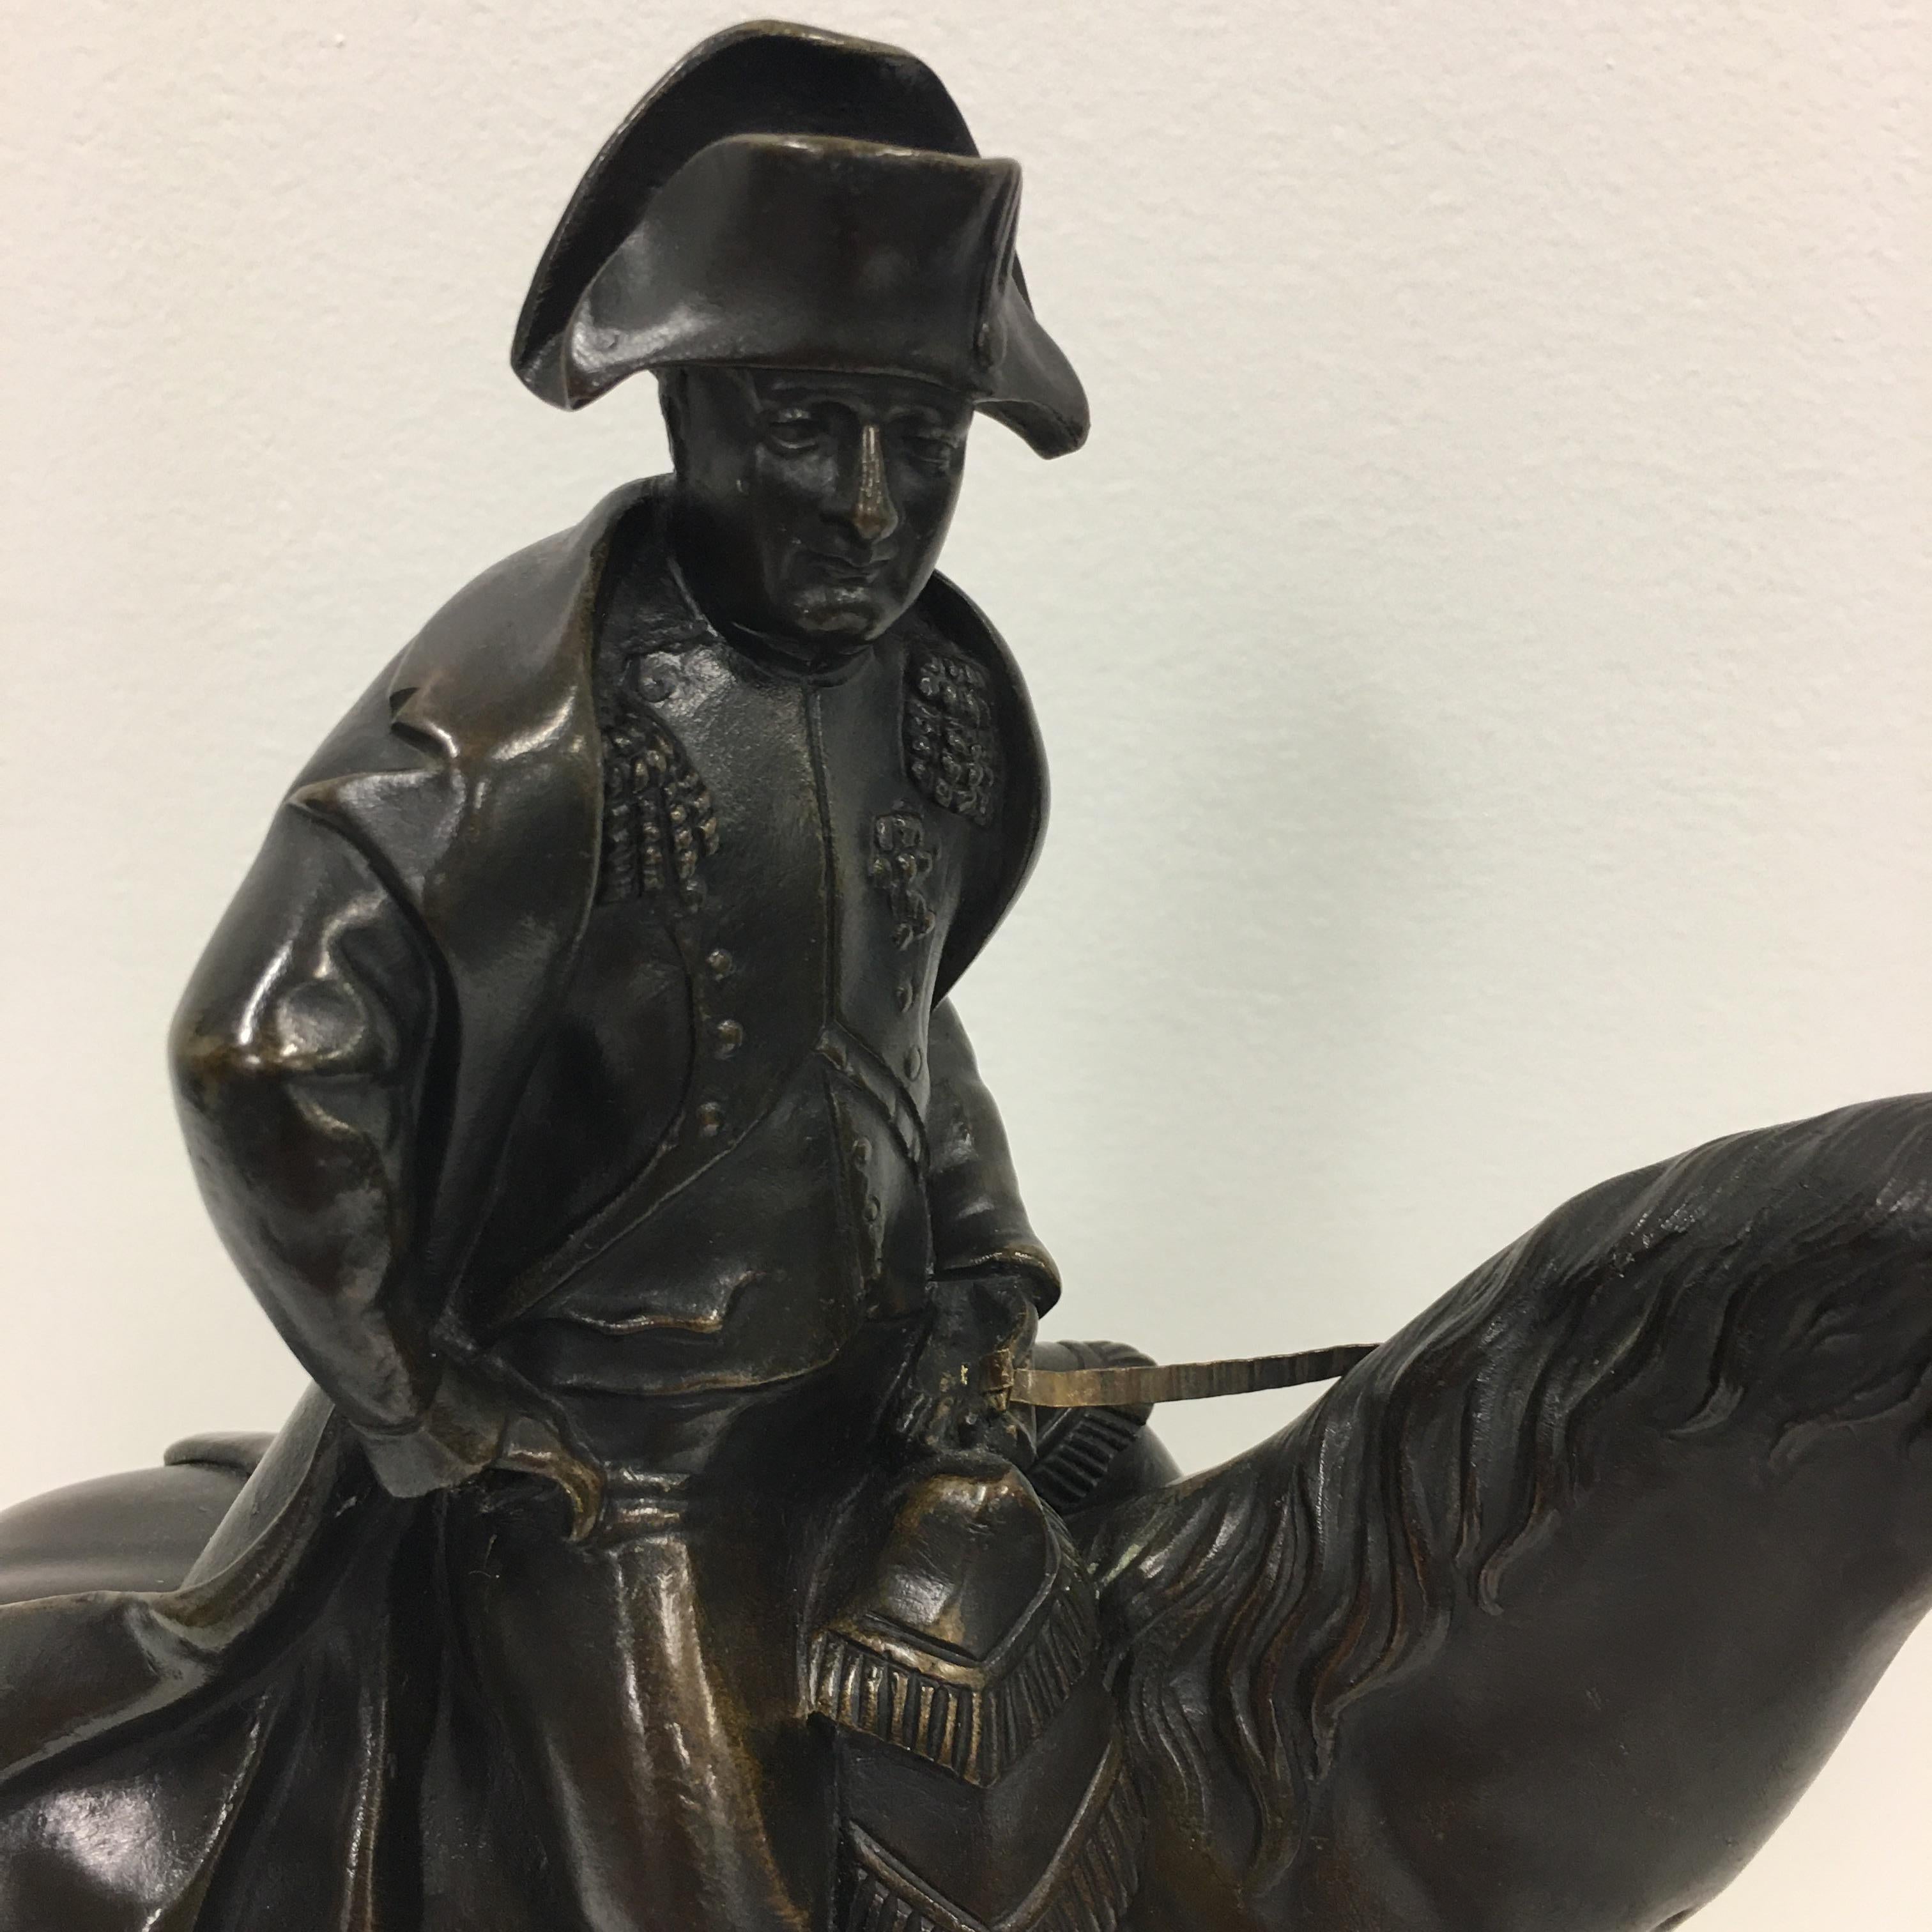 A 19th. century French bronze of Napoleon Bonaparte mounted on his horse. He is wearing A bicorn hat, breeches, vest and A long coat seated on a fringed saddle. The bronze is mounted above a rectangular white marble base. Signed :Garnier ( J.